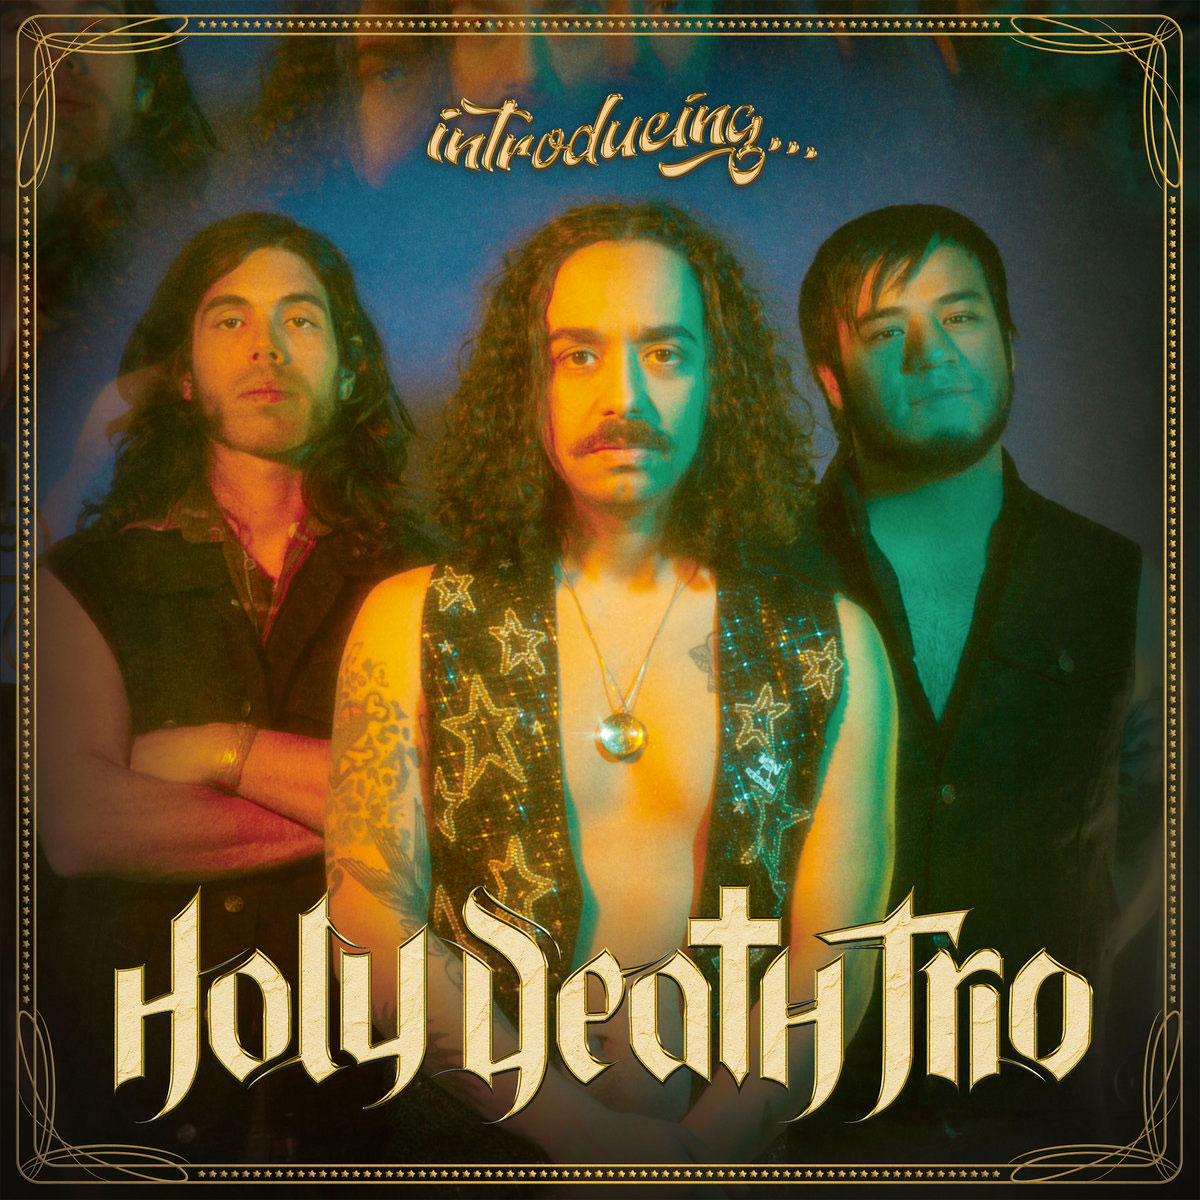 Introducing… by Holy Death Trio